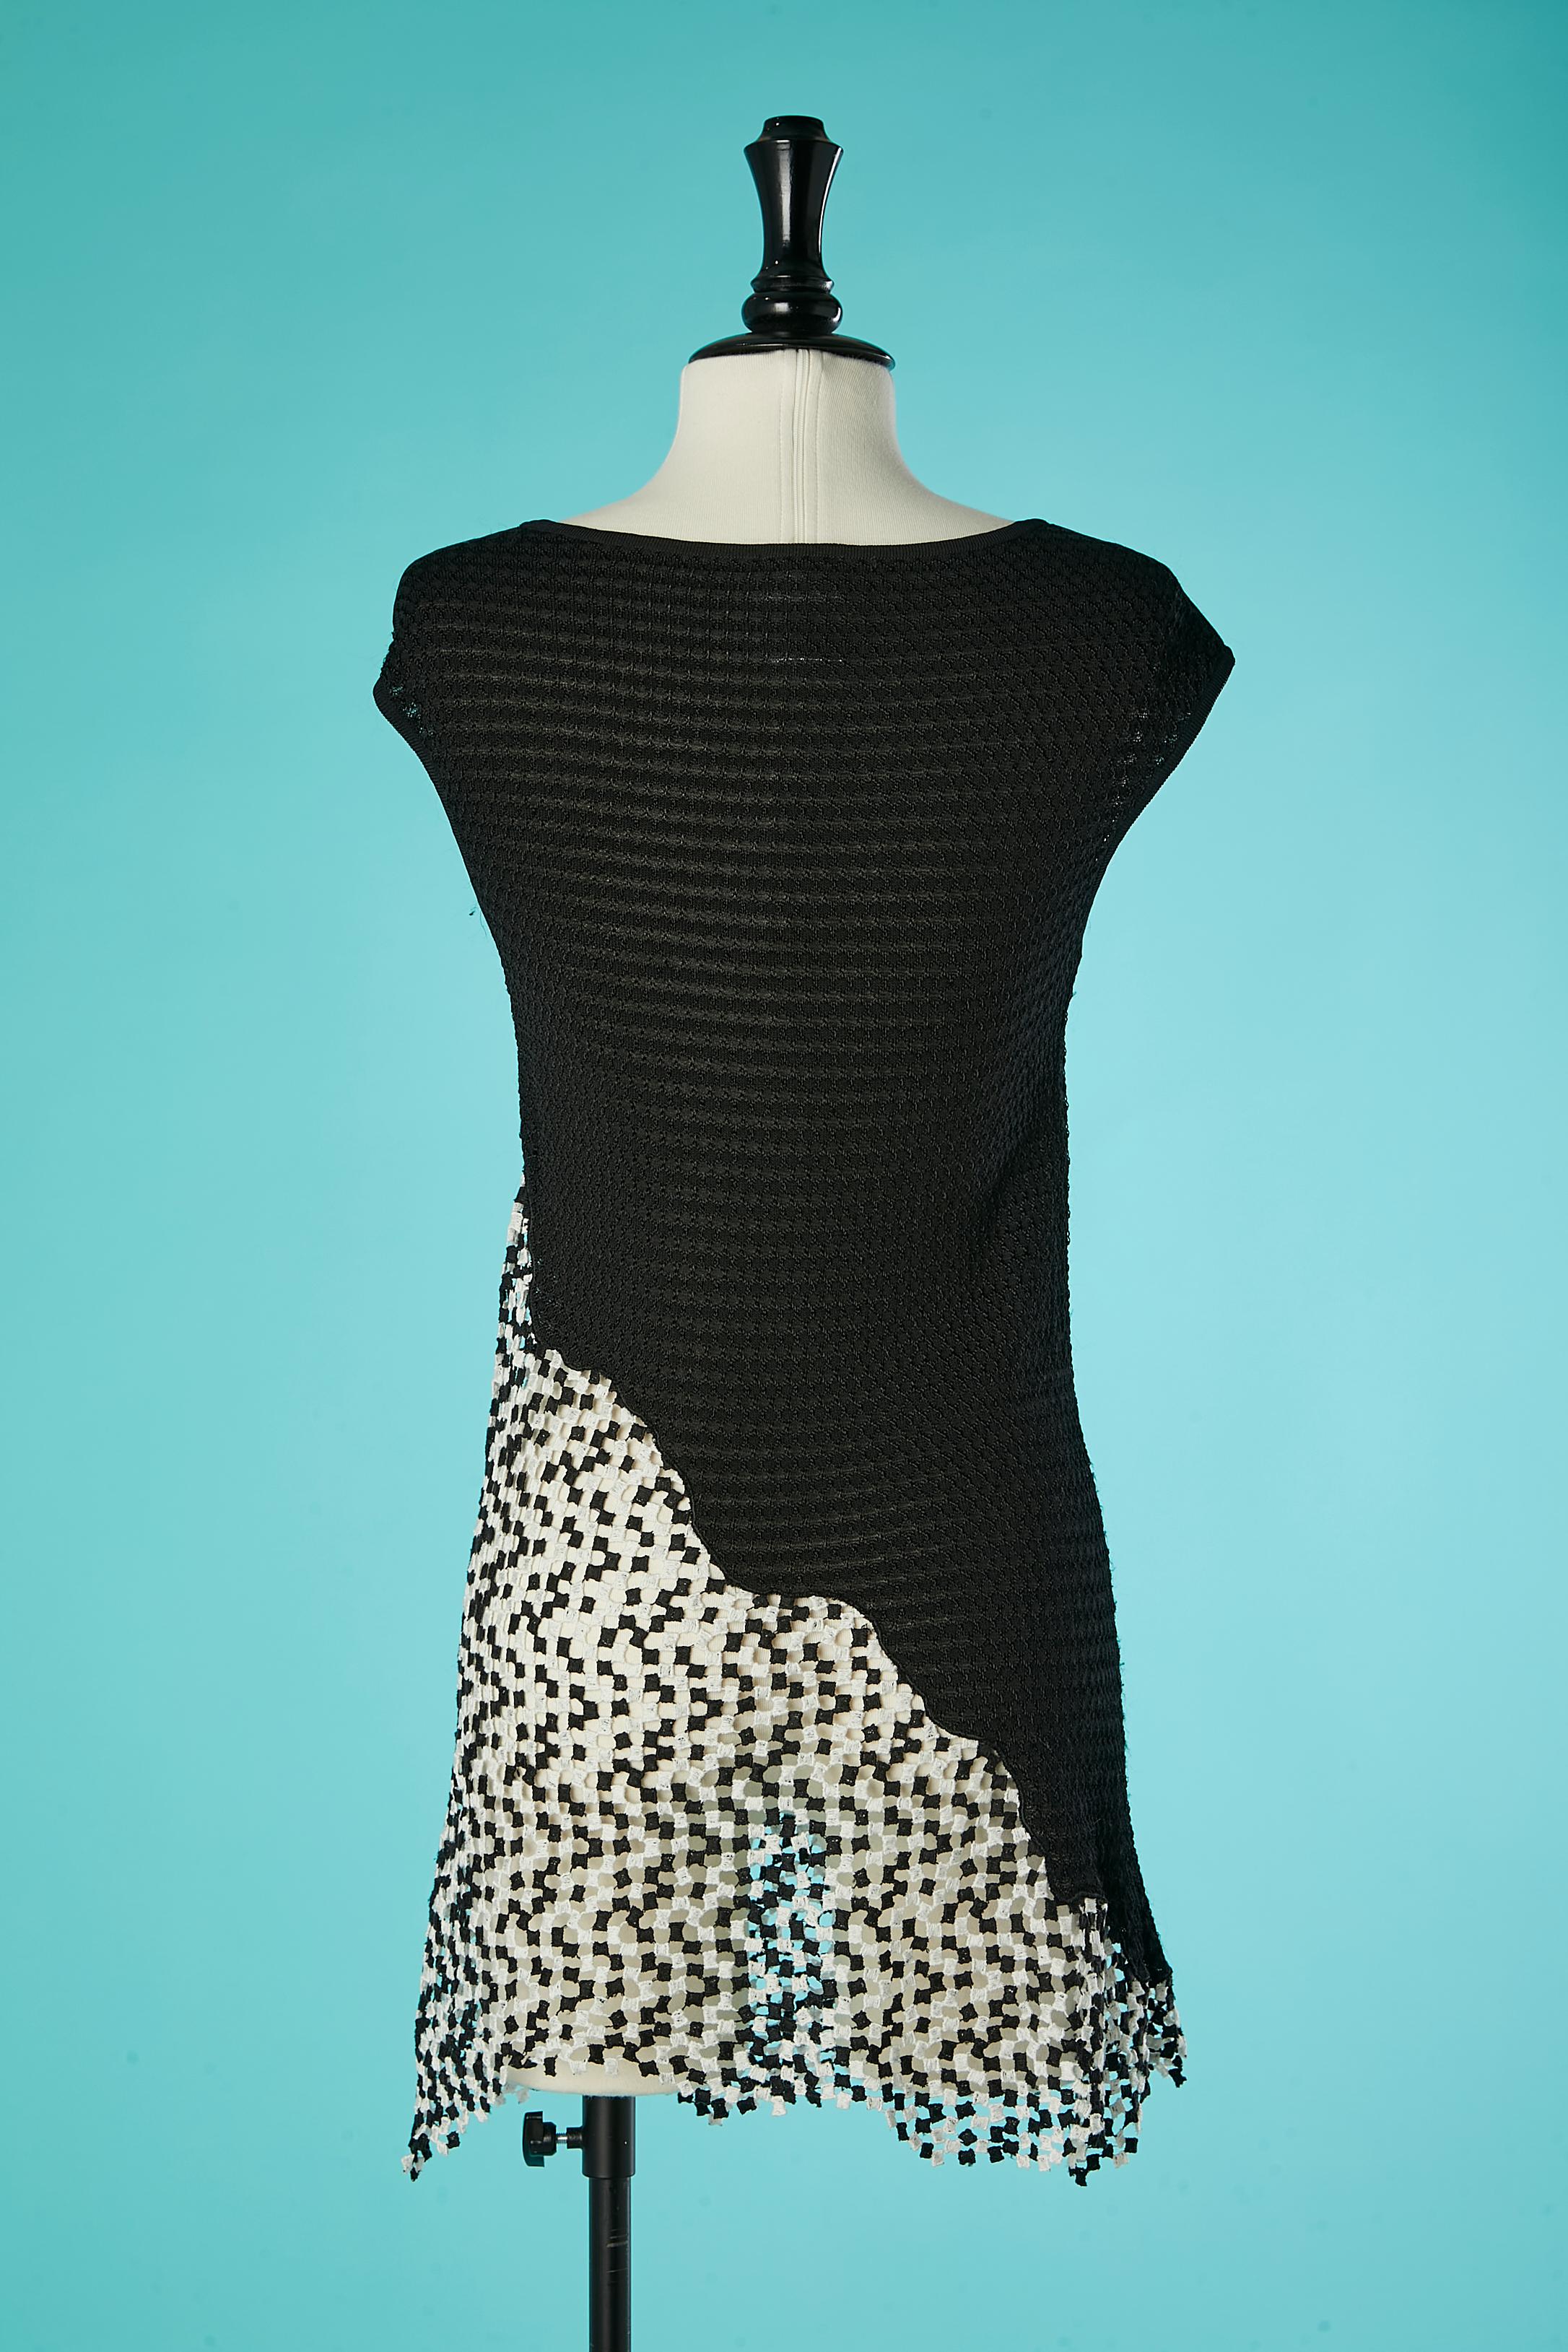 Black asymmetrical knit sleeveless dress with black & white inset lace Chanel  For Sale 3